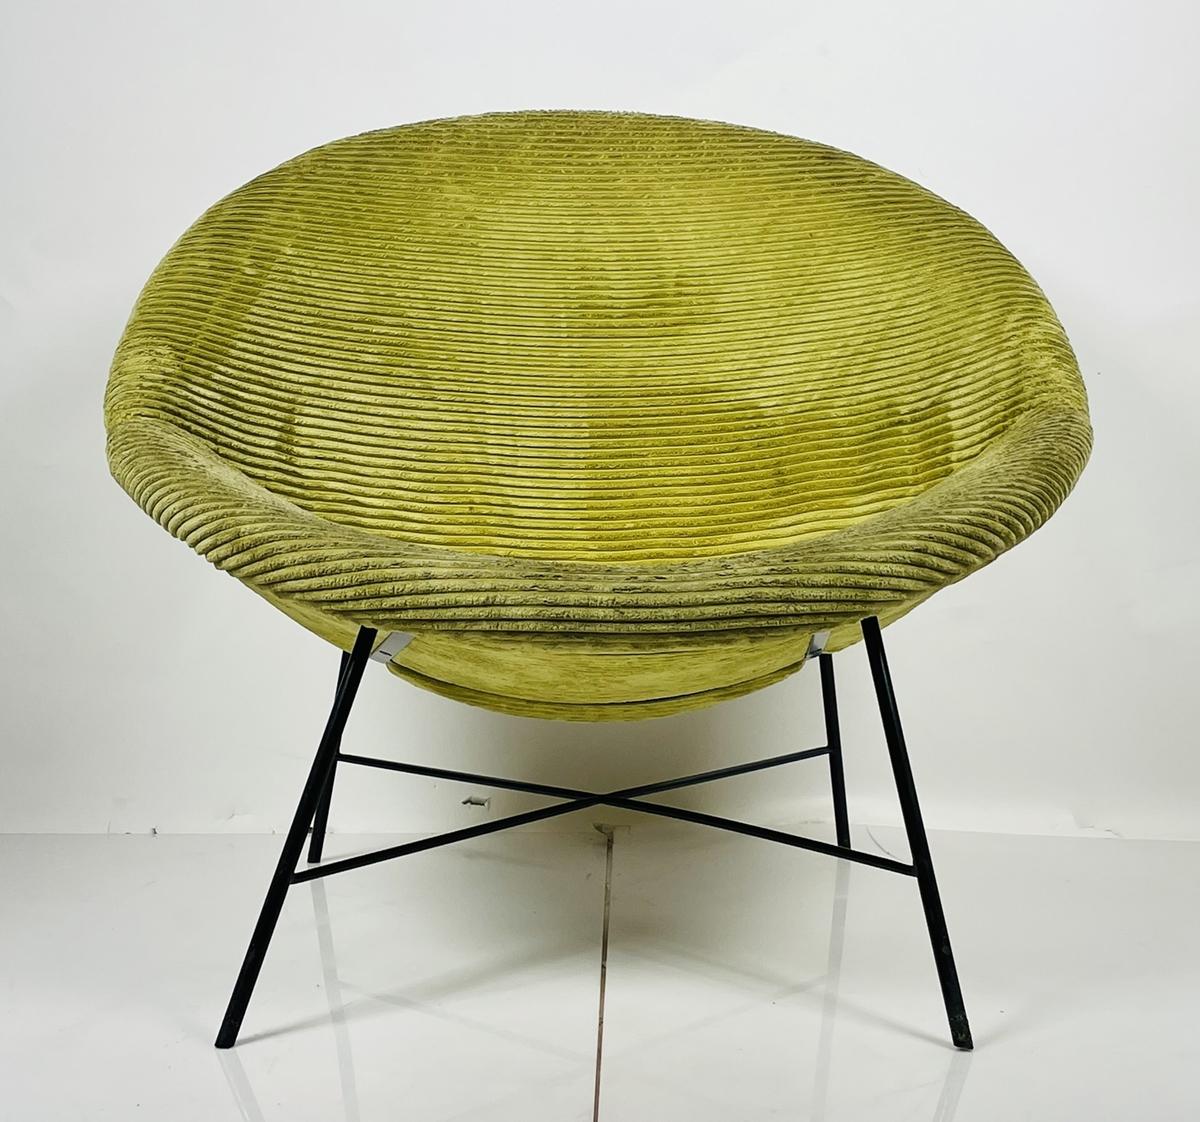 Mid-Century Modern style scoop chair with beautiful architectural lines, havinf a molded steel base and an upholstered seat.

The chair is very confortable and well made, unmarked.

Measurements:
35 inches high x 39 inches wide x 33.50 inches